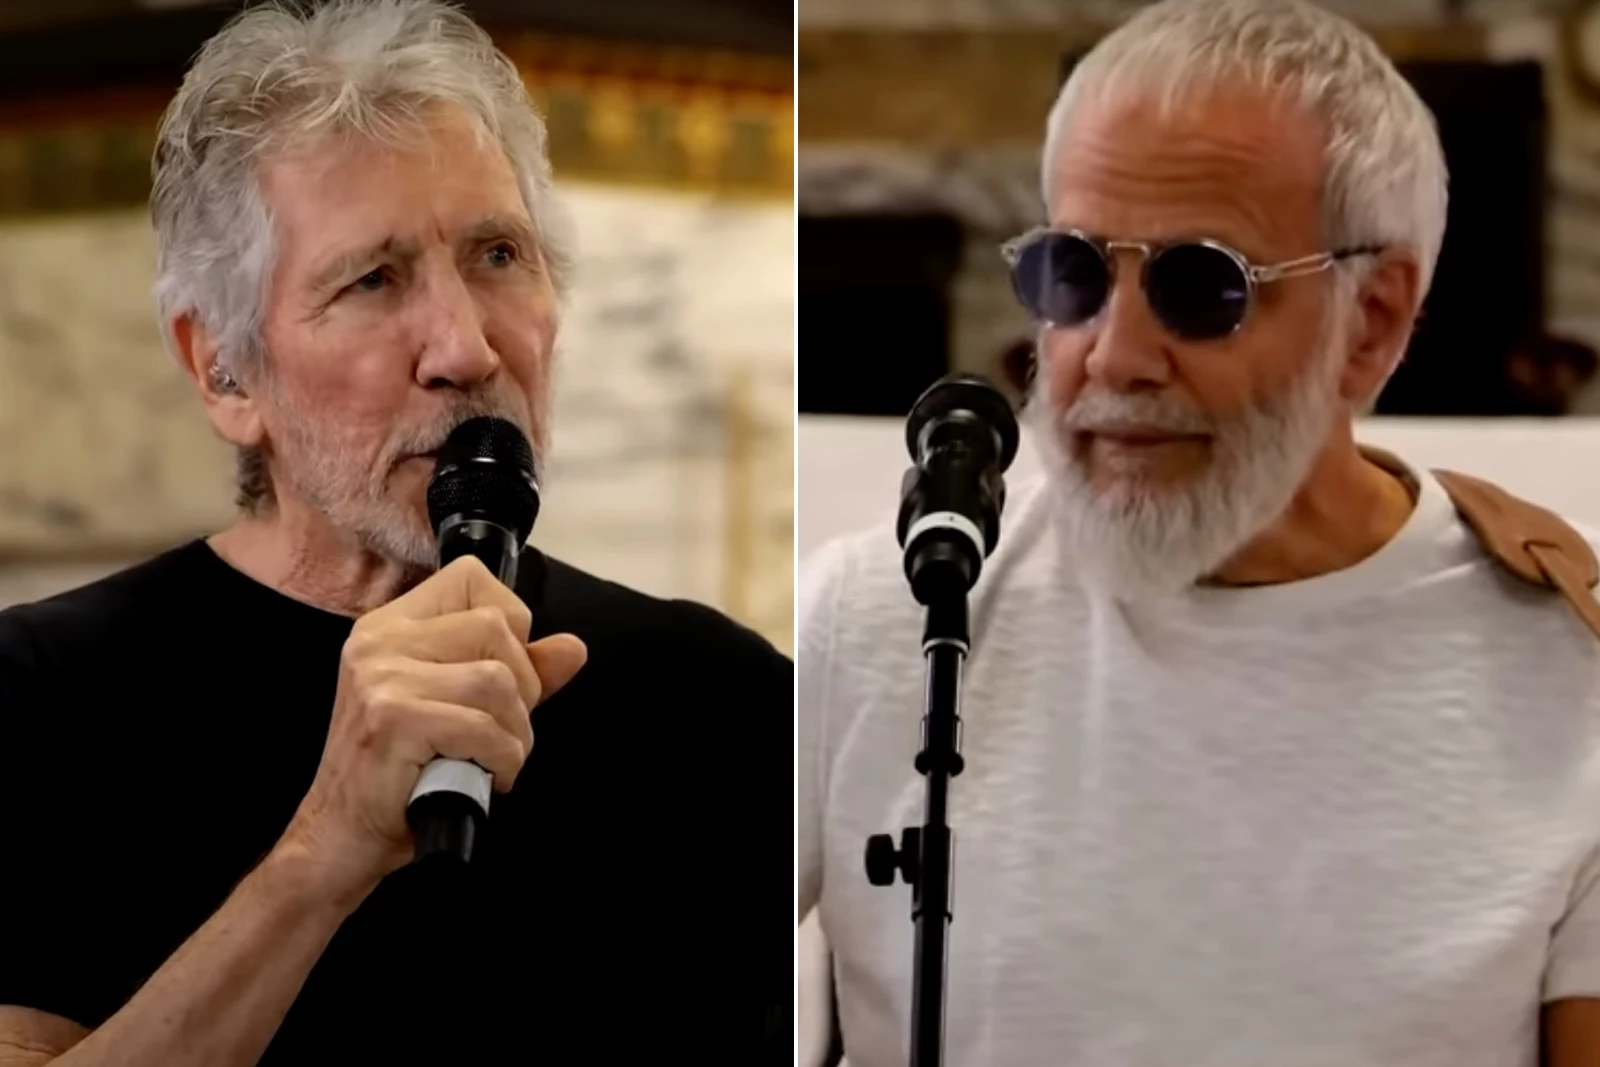 Watch Roger Waters Play 'Wish You Were Here' at Palestine Benefit